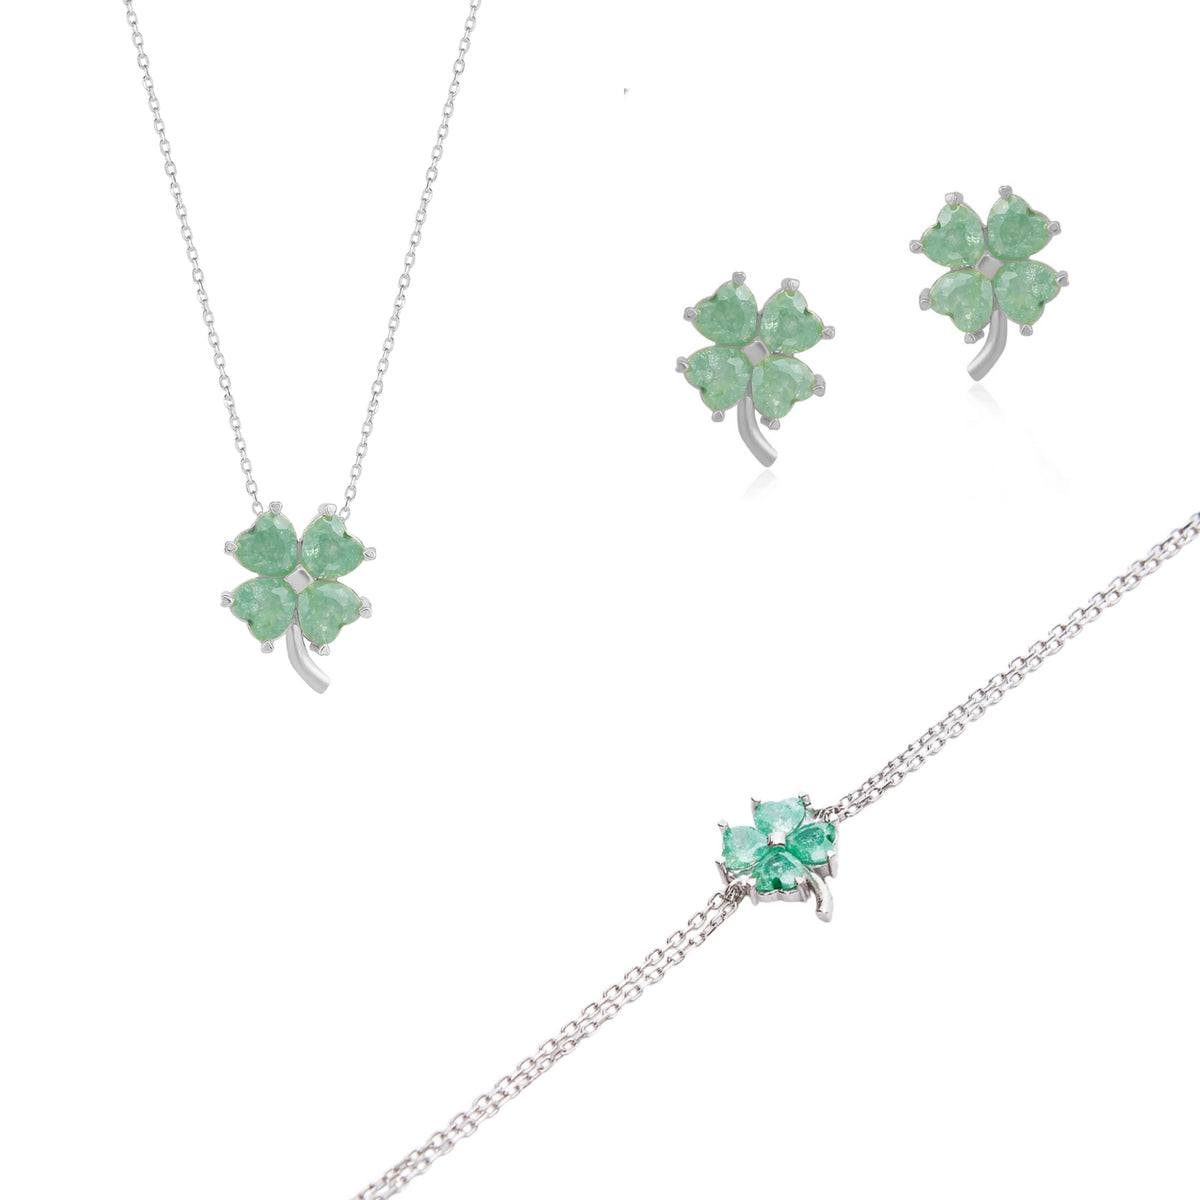 Best of Luck Four Leaves Clover Sterling Silver Bracelet Necklace and Stud Earring Set